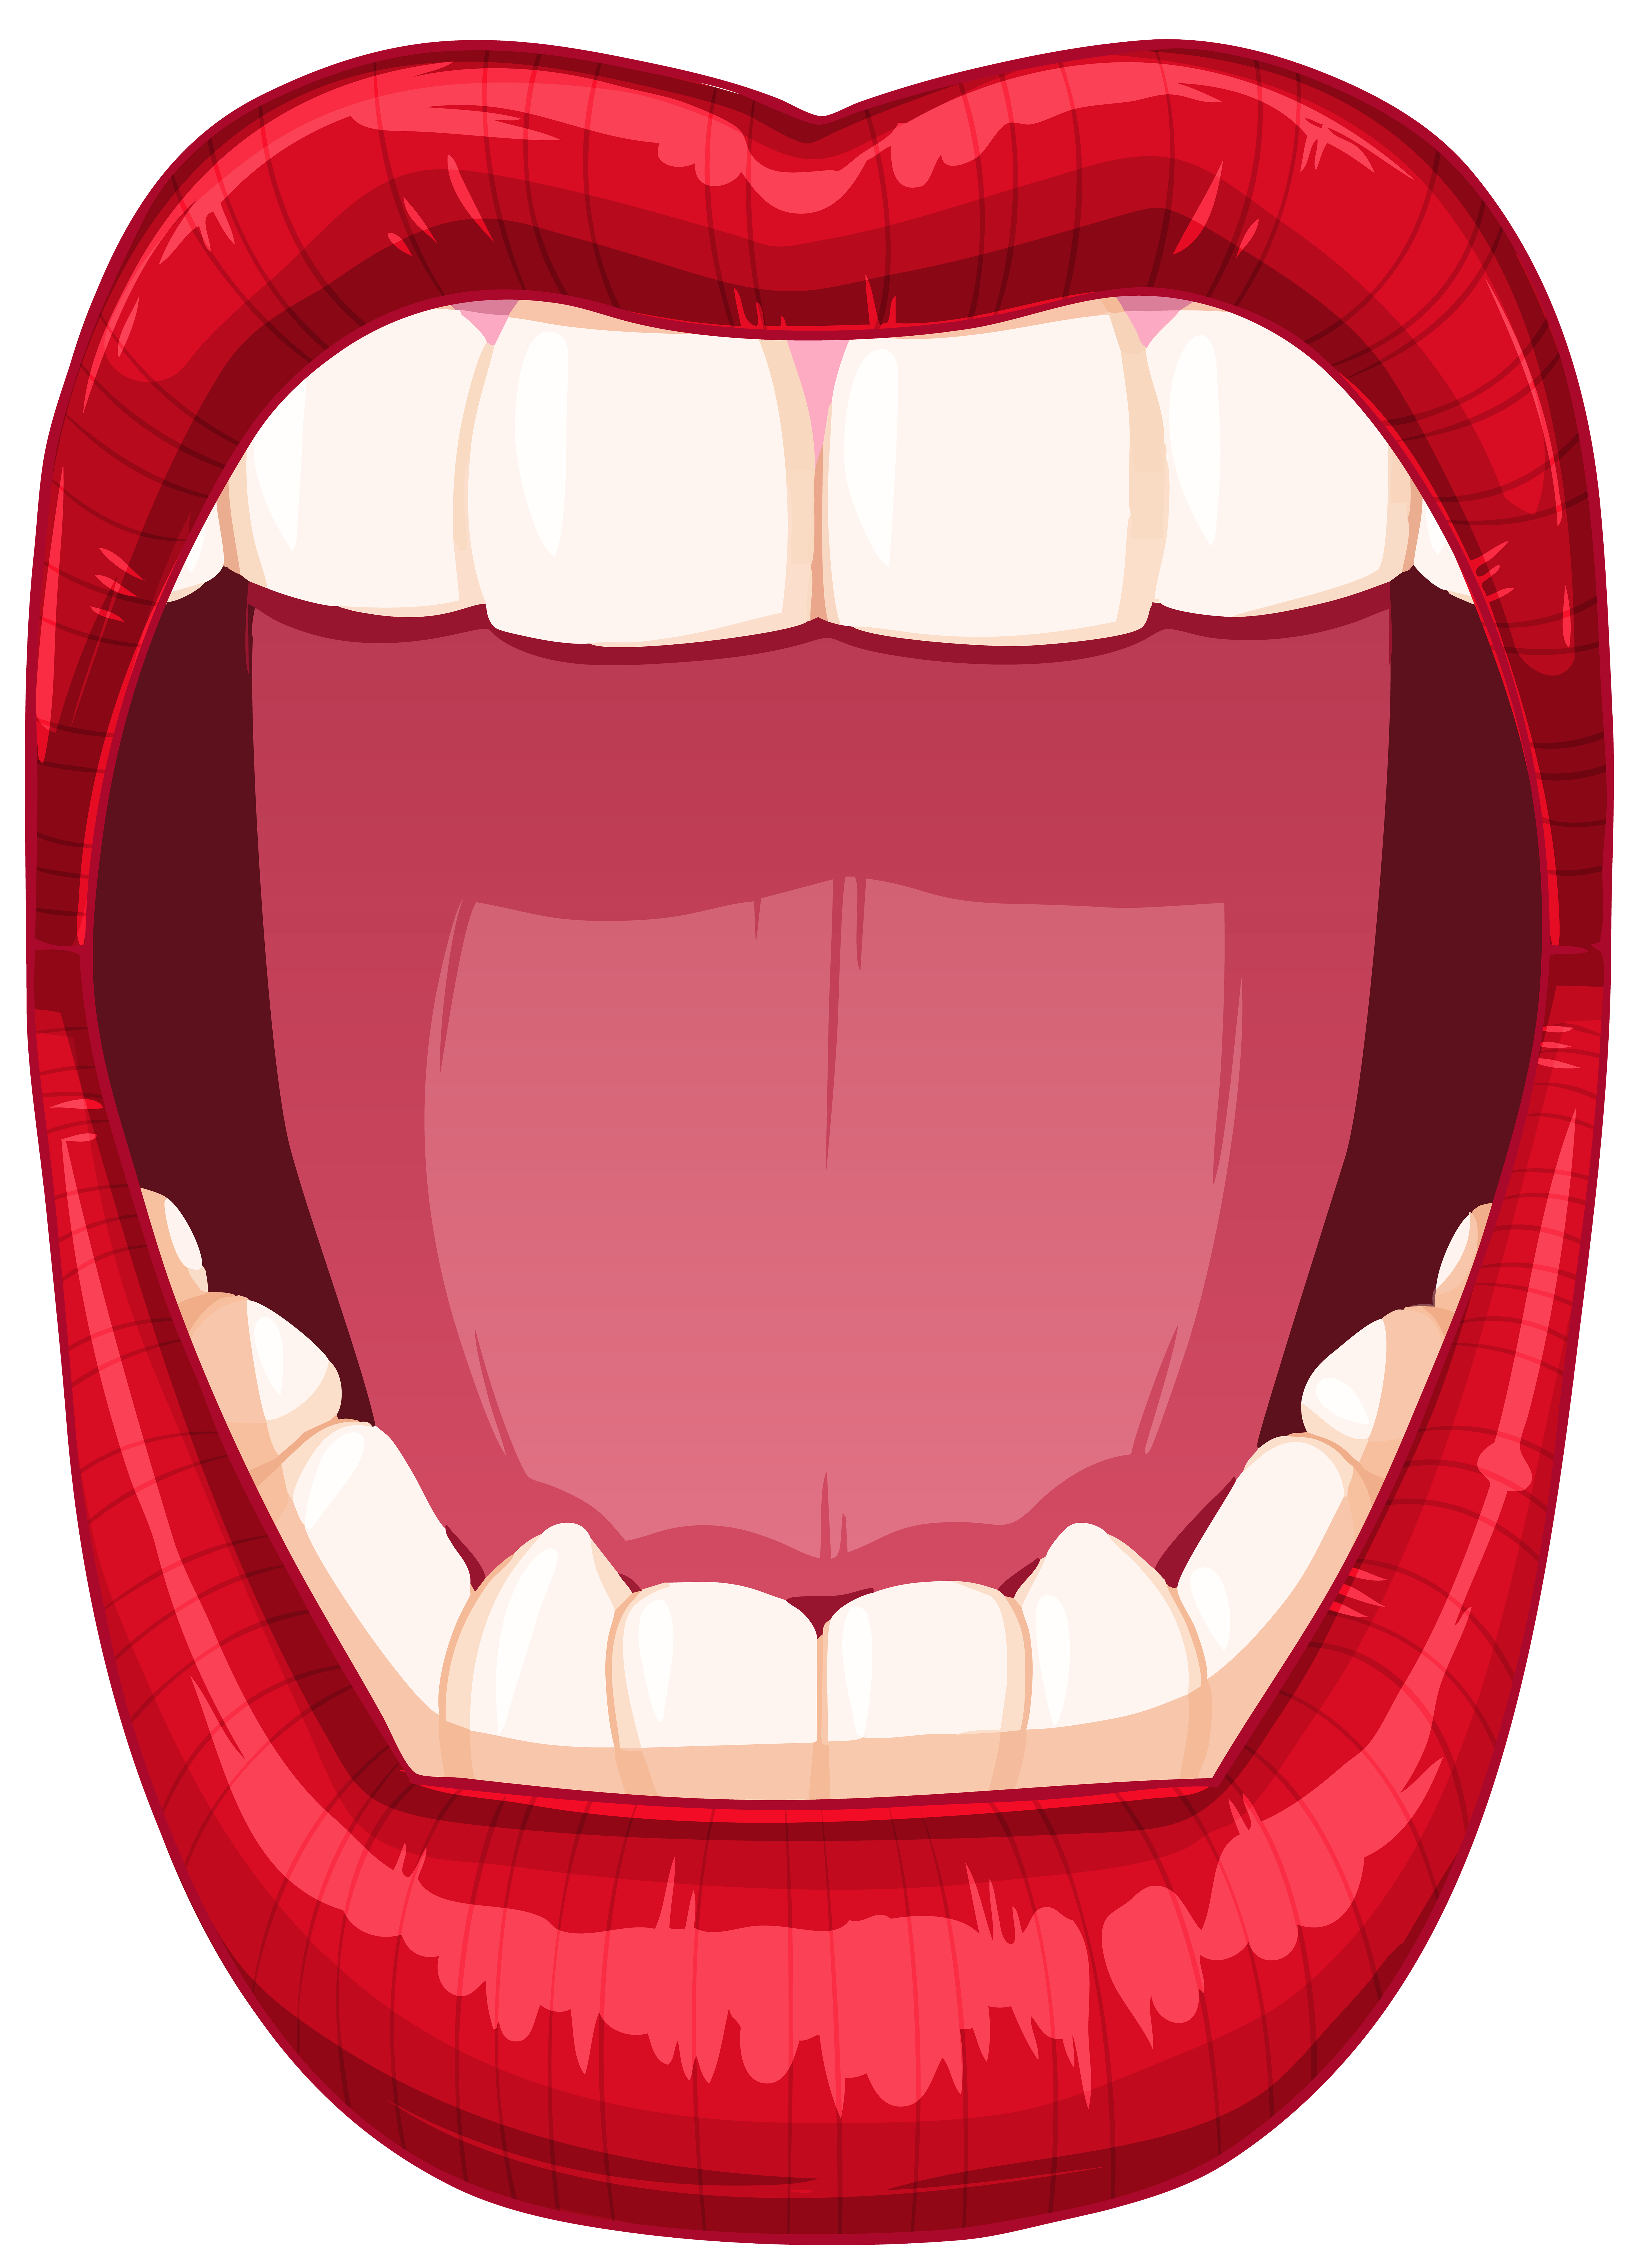 Open Mouth Teeth PNG Photos